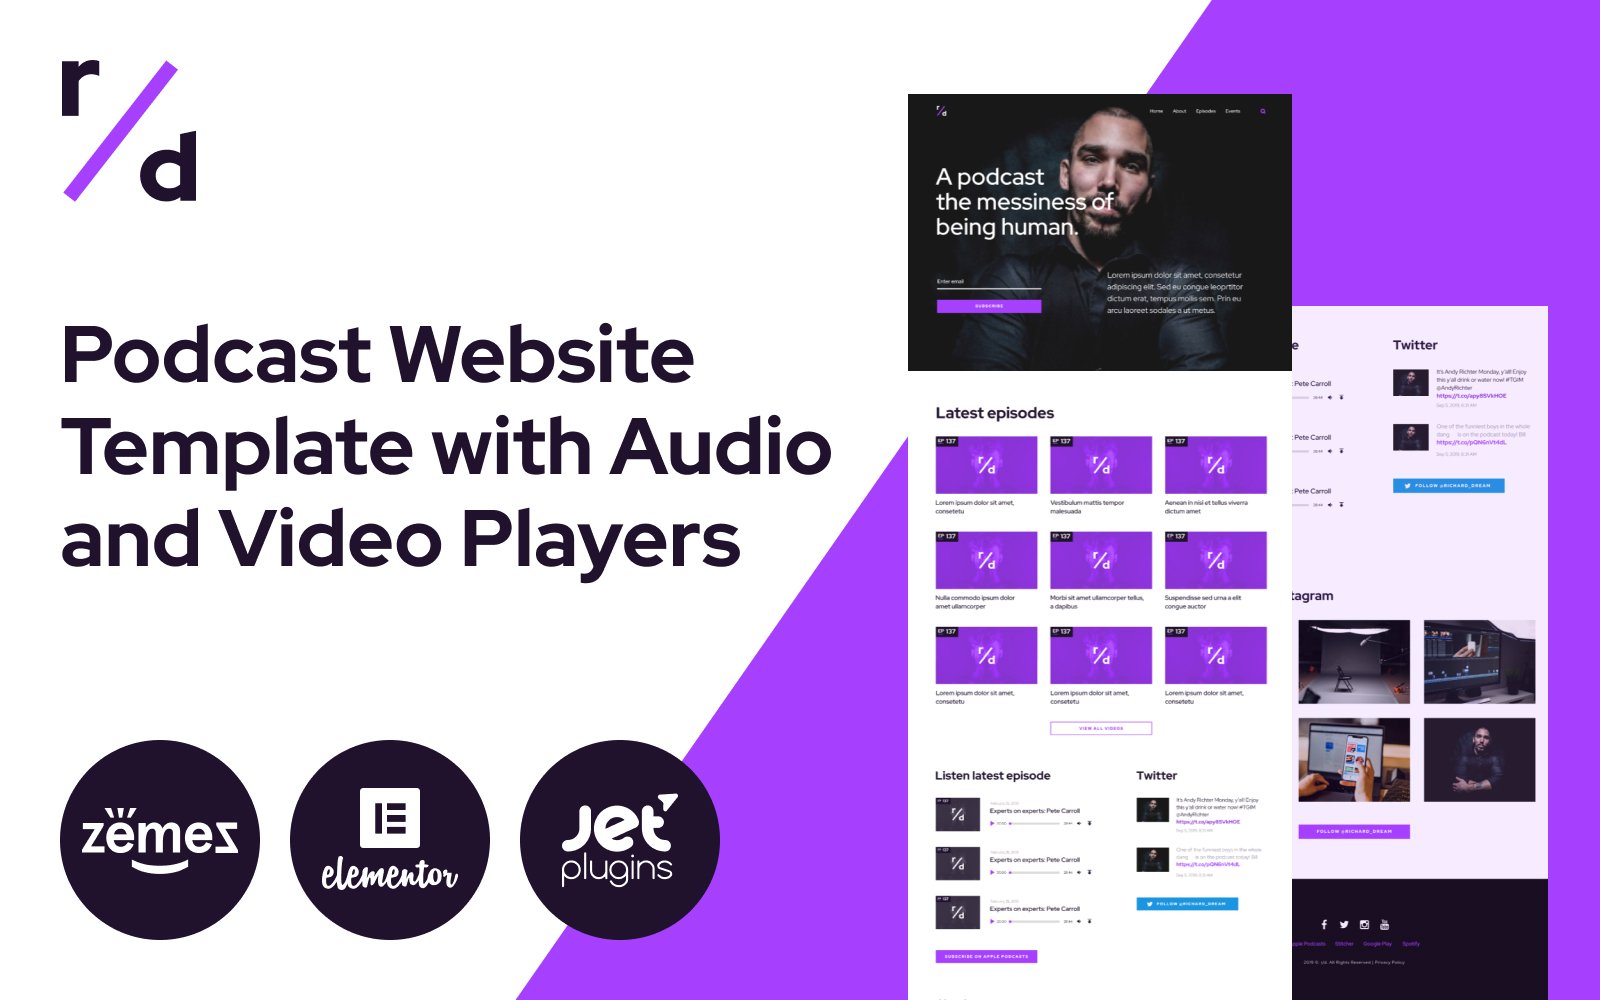 Richard Dream Podcast Website Template with Audio and Video Players